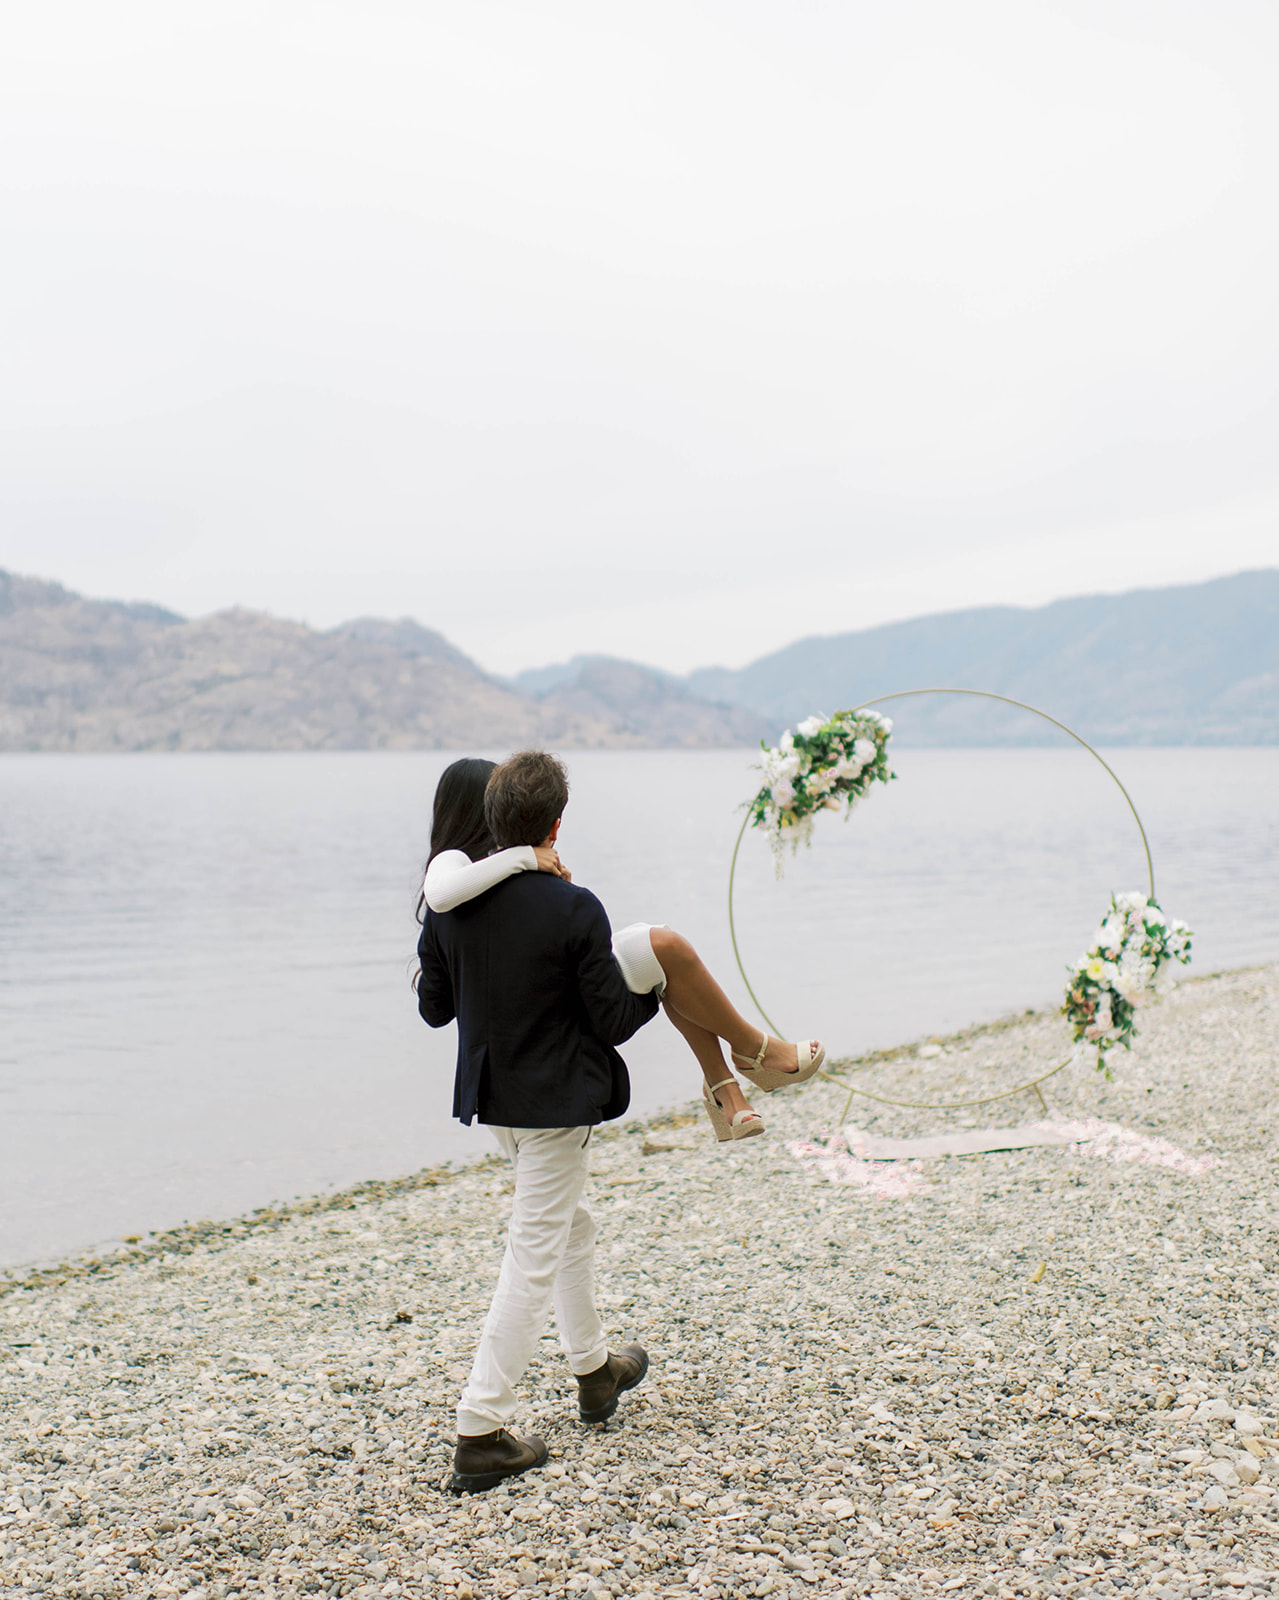 Perfectly Planned Romantic Proposal at Peachland Beach, in the Okanagan Valley, captured on film by Kelowna Wedding Photographer, Minted Photography. - proposal planning, proposal inspiration, summer proposal ideas, surprise proposal, romantic proposal inspiration